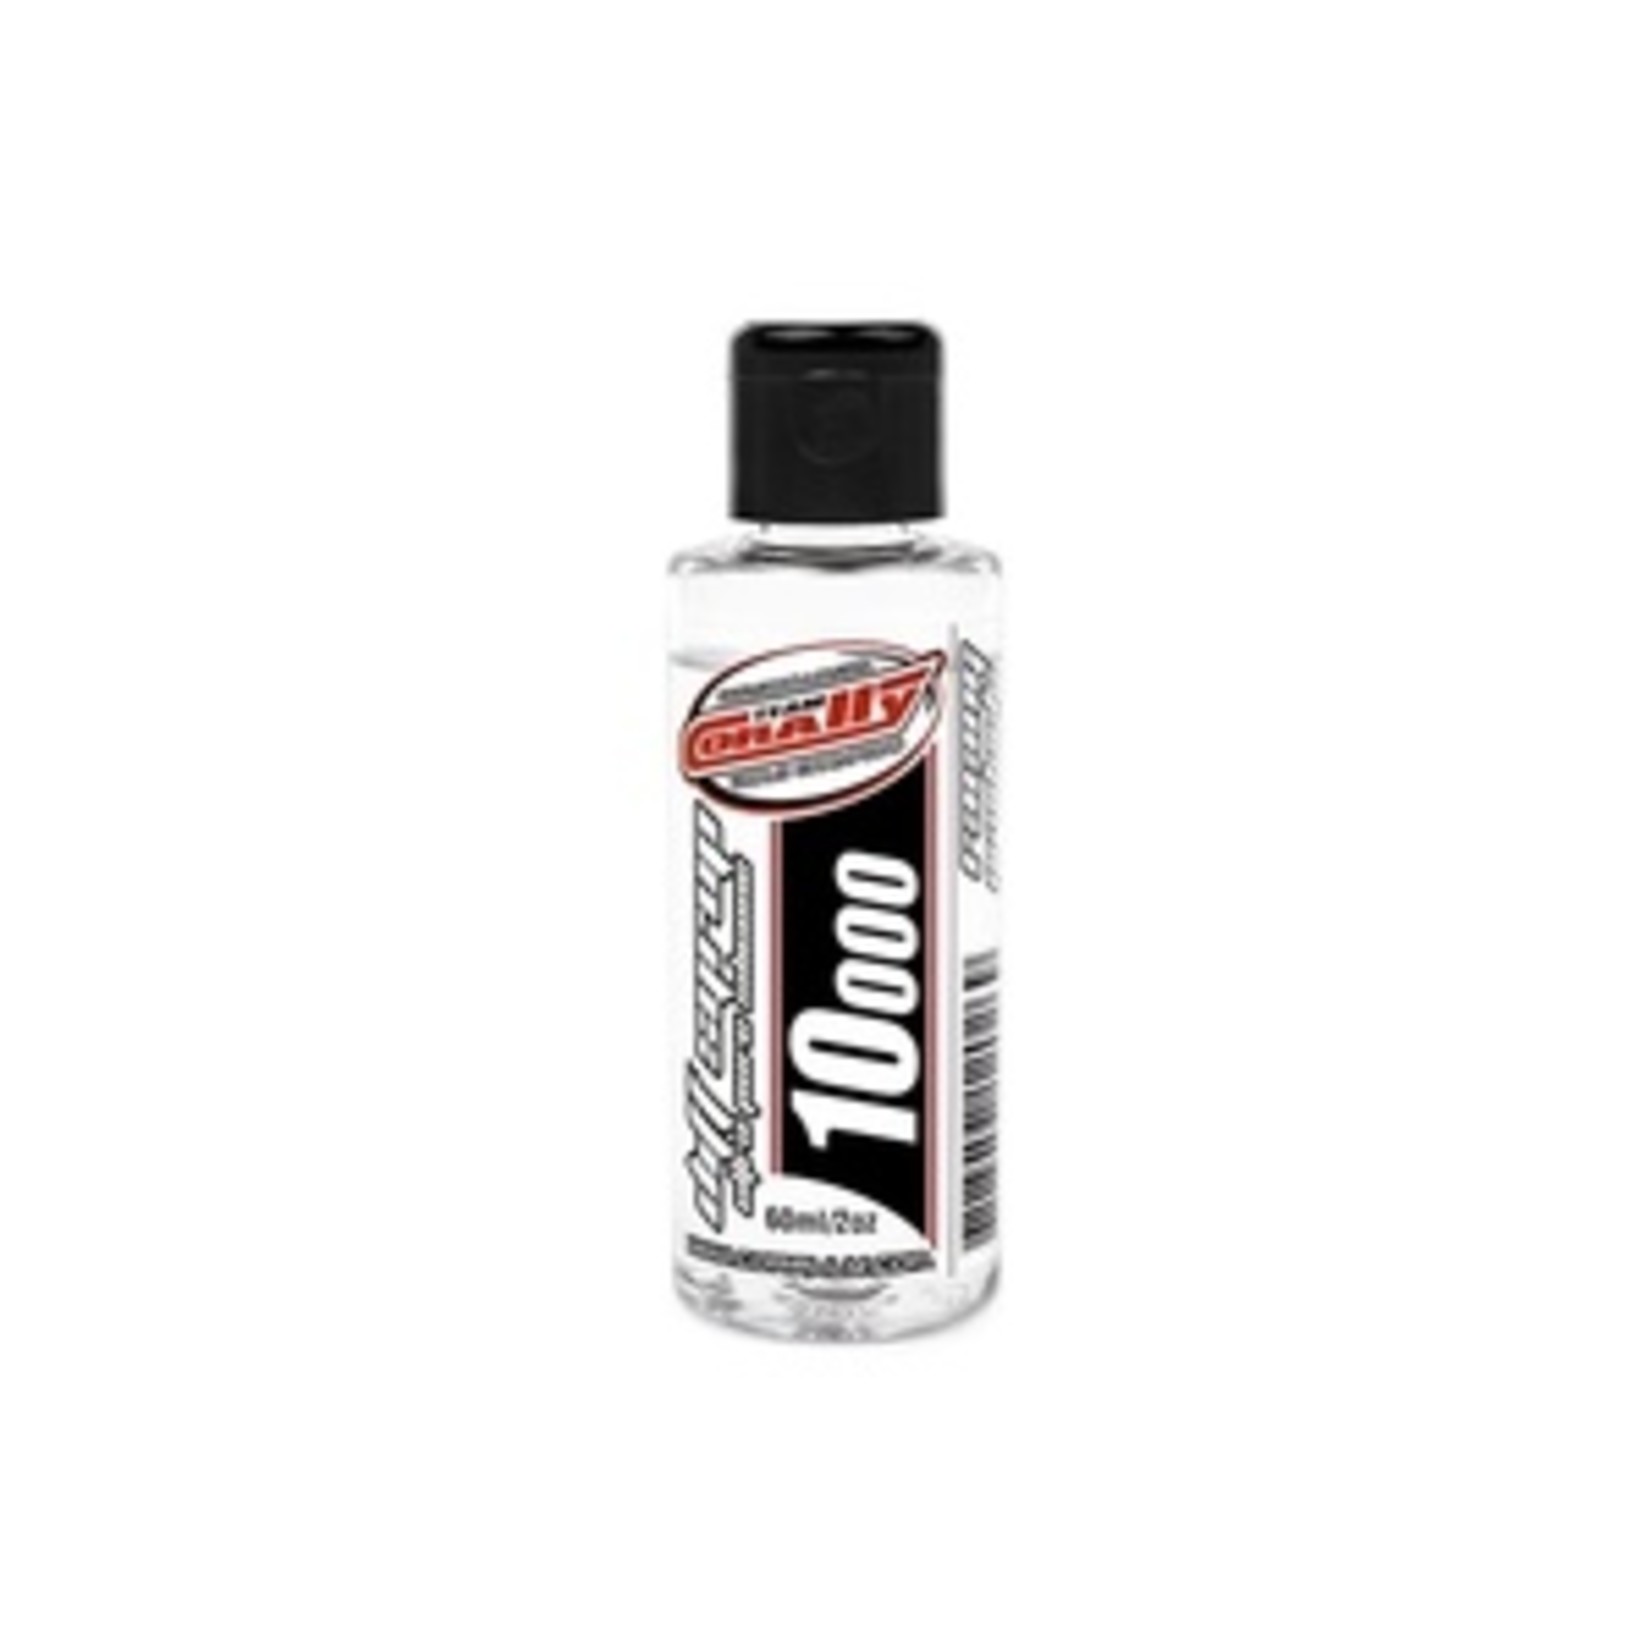 Corally (Team Corally) Ultra Pure Silicone Diff Oil (Syrup) - 10000 CPS - 60ml